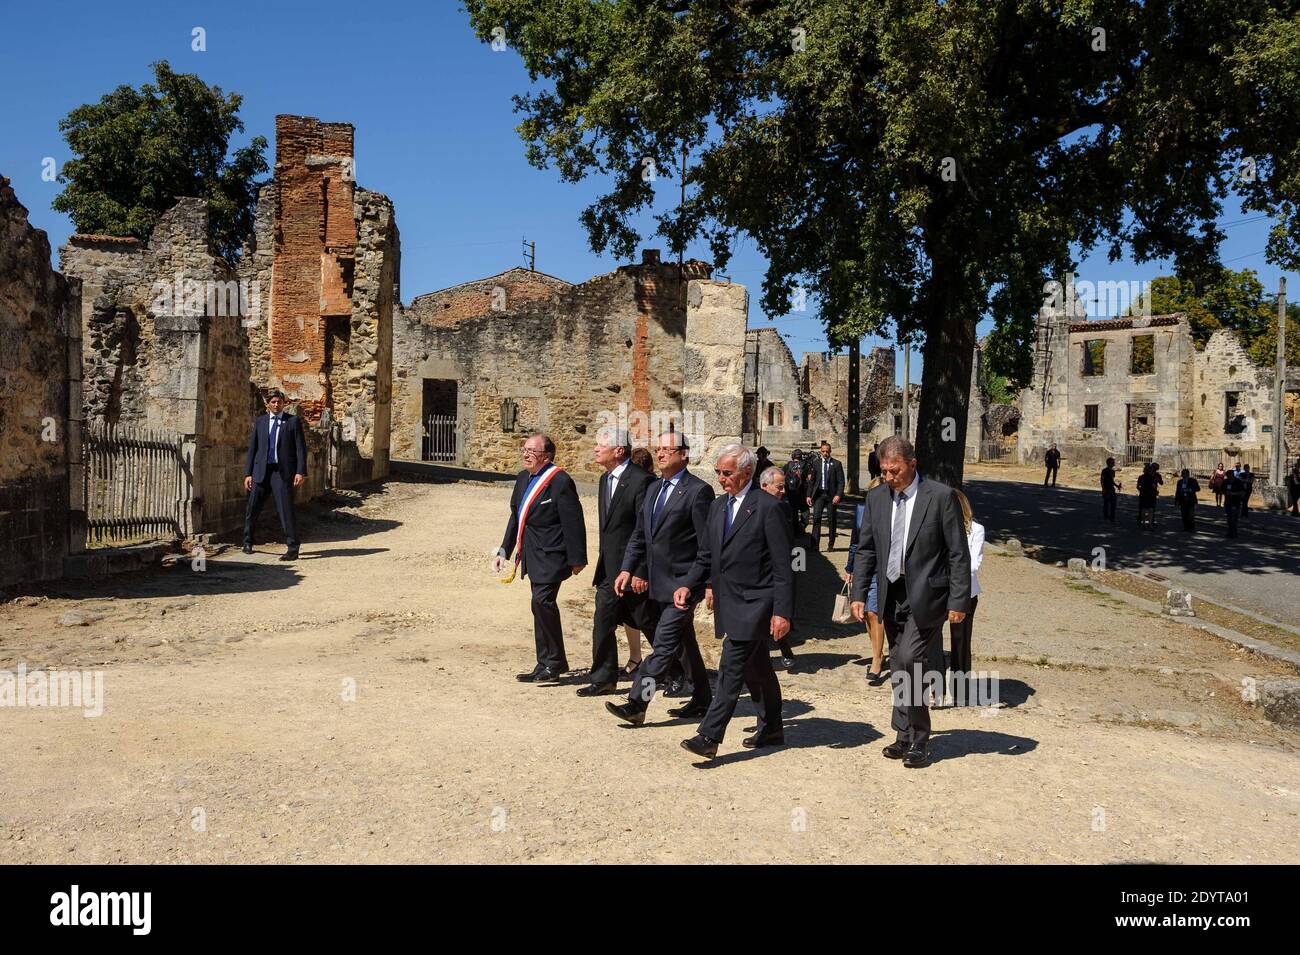 French President Francois Hollande and German President Joachim Gauck are pictured at the memorial site in Oradour-sur-Glane, France on September 4, 2013. A unit of SS officers murdered 642 citizens of the town during World War II in June 1944. The German President is on a three-day visit to France. Photo by Christophe Petit Tesson/Pool/ABACAPRESS.COM Stock Photo